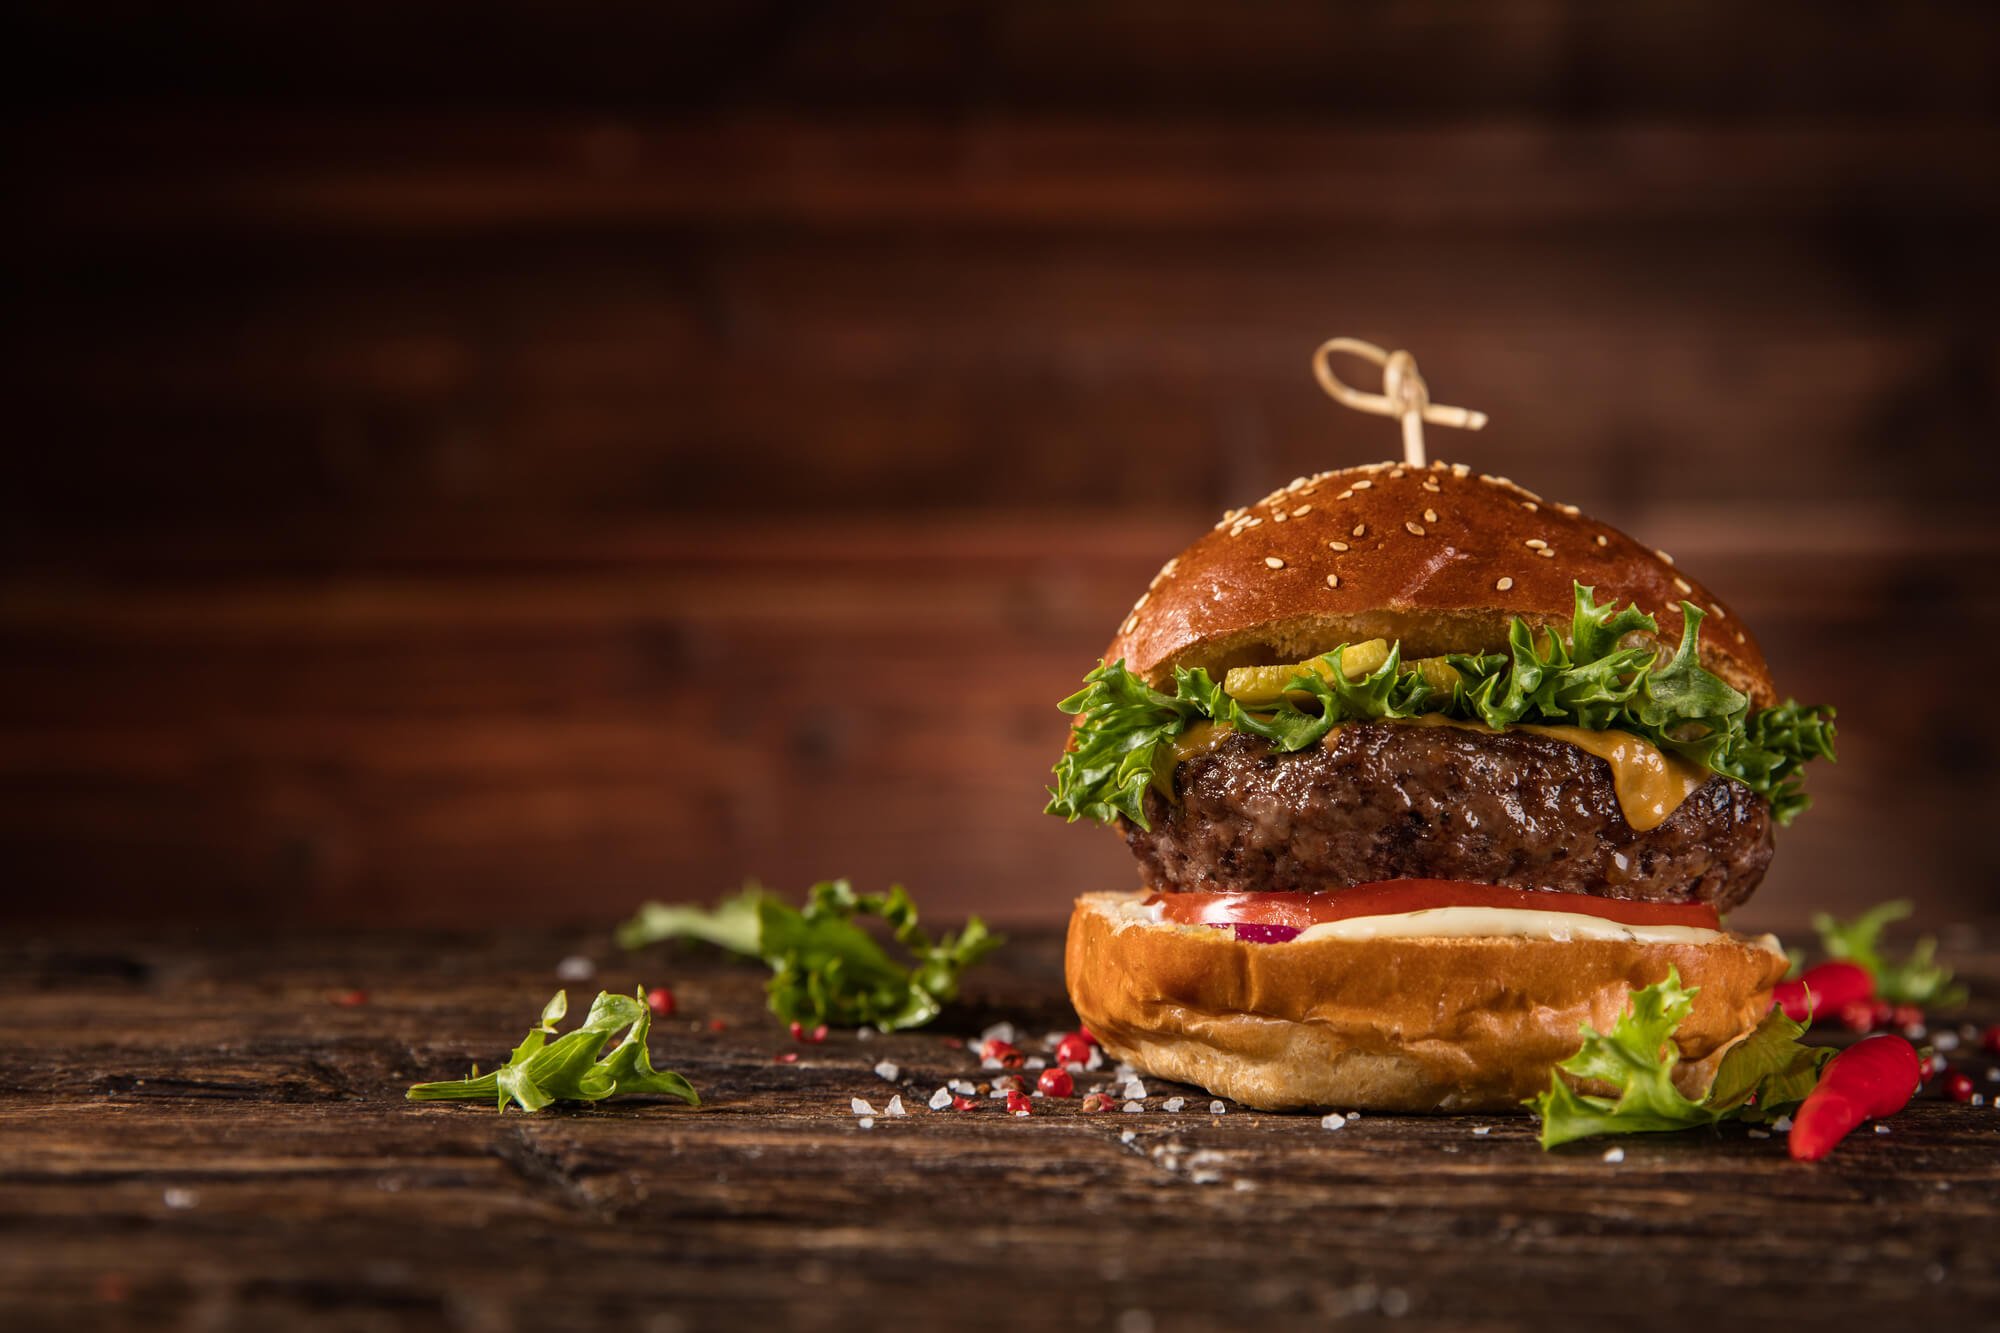 A burger on a wooden board against a dark background